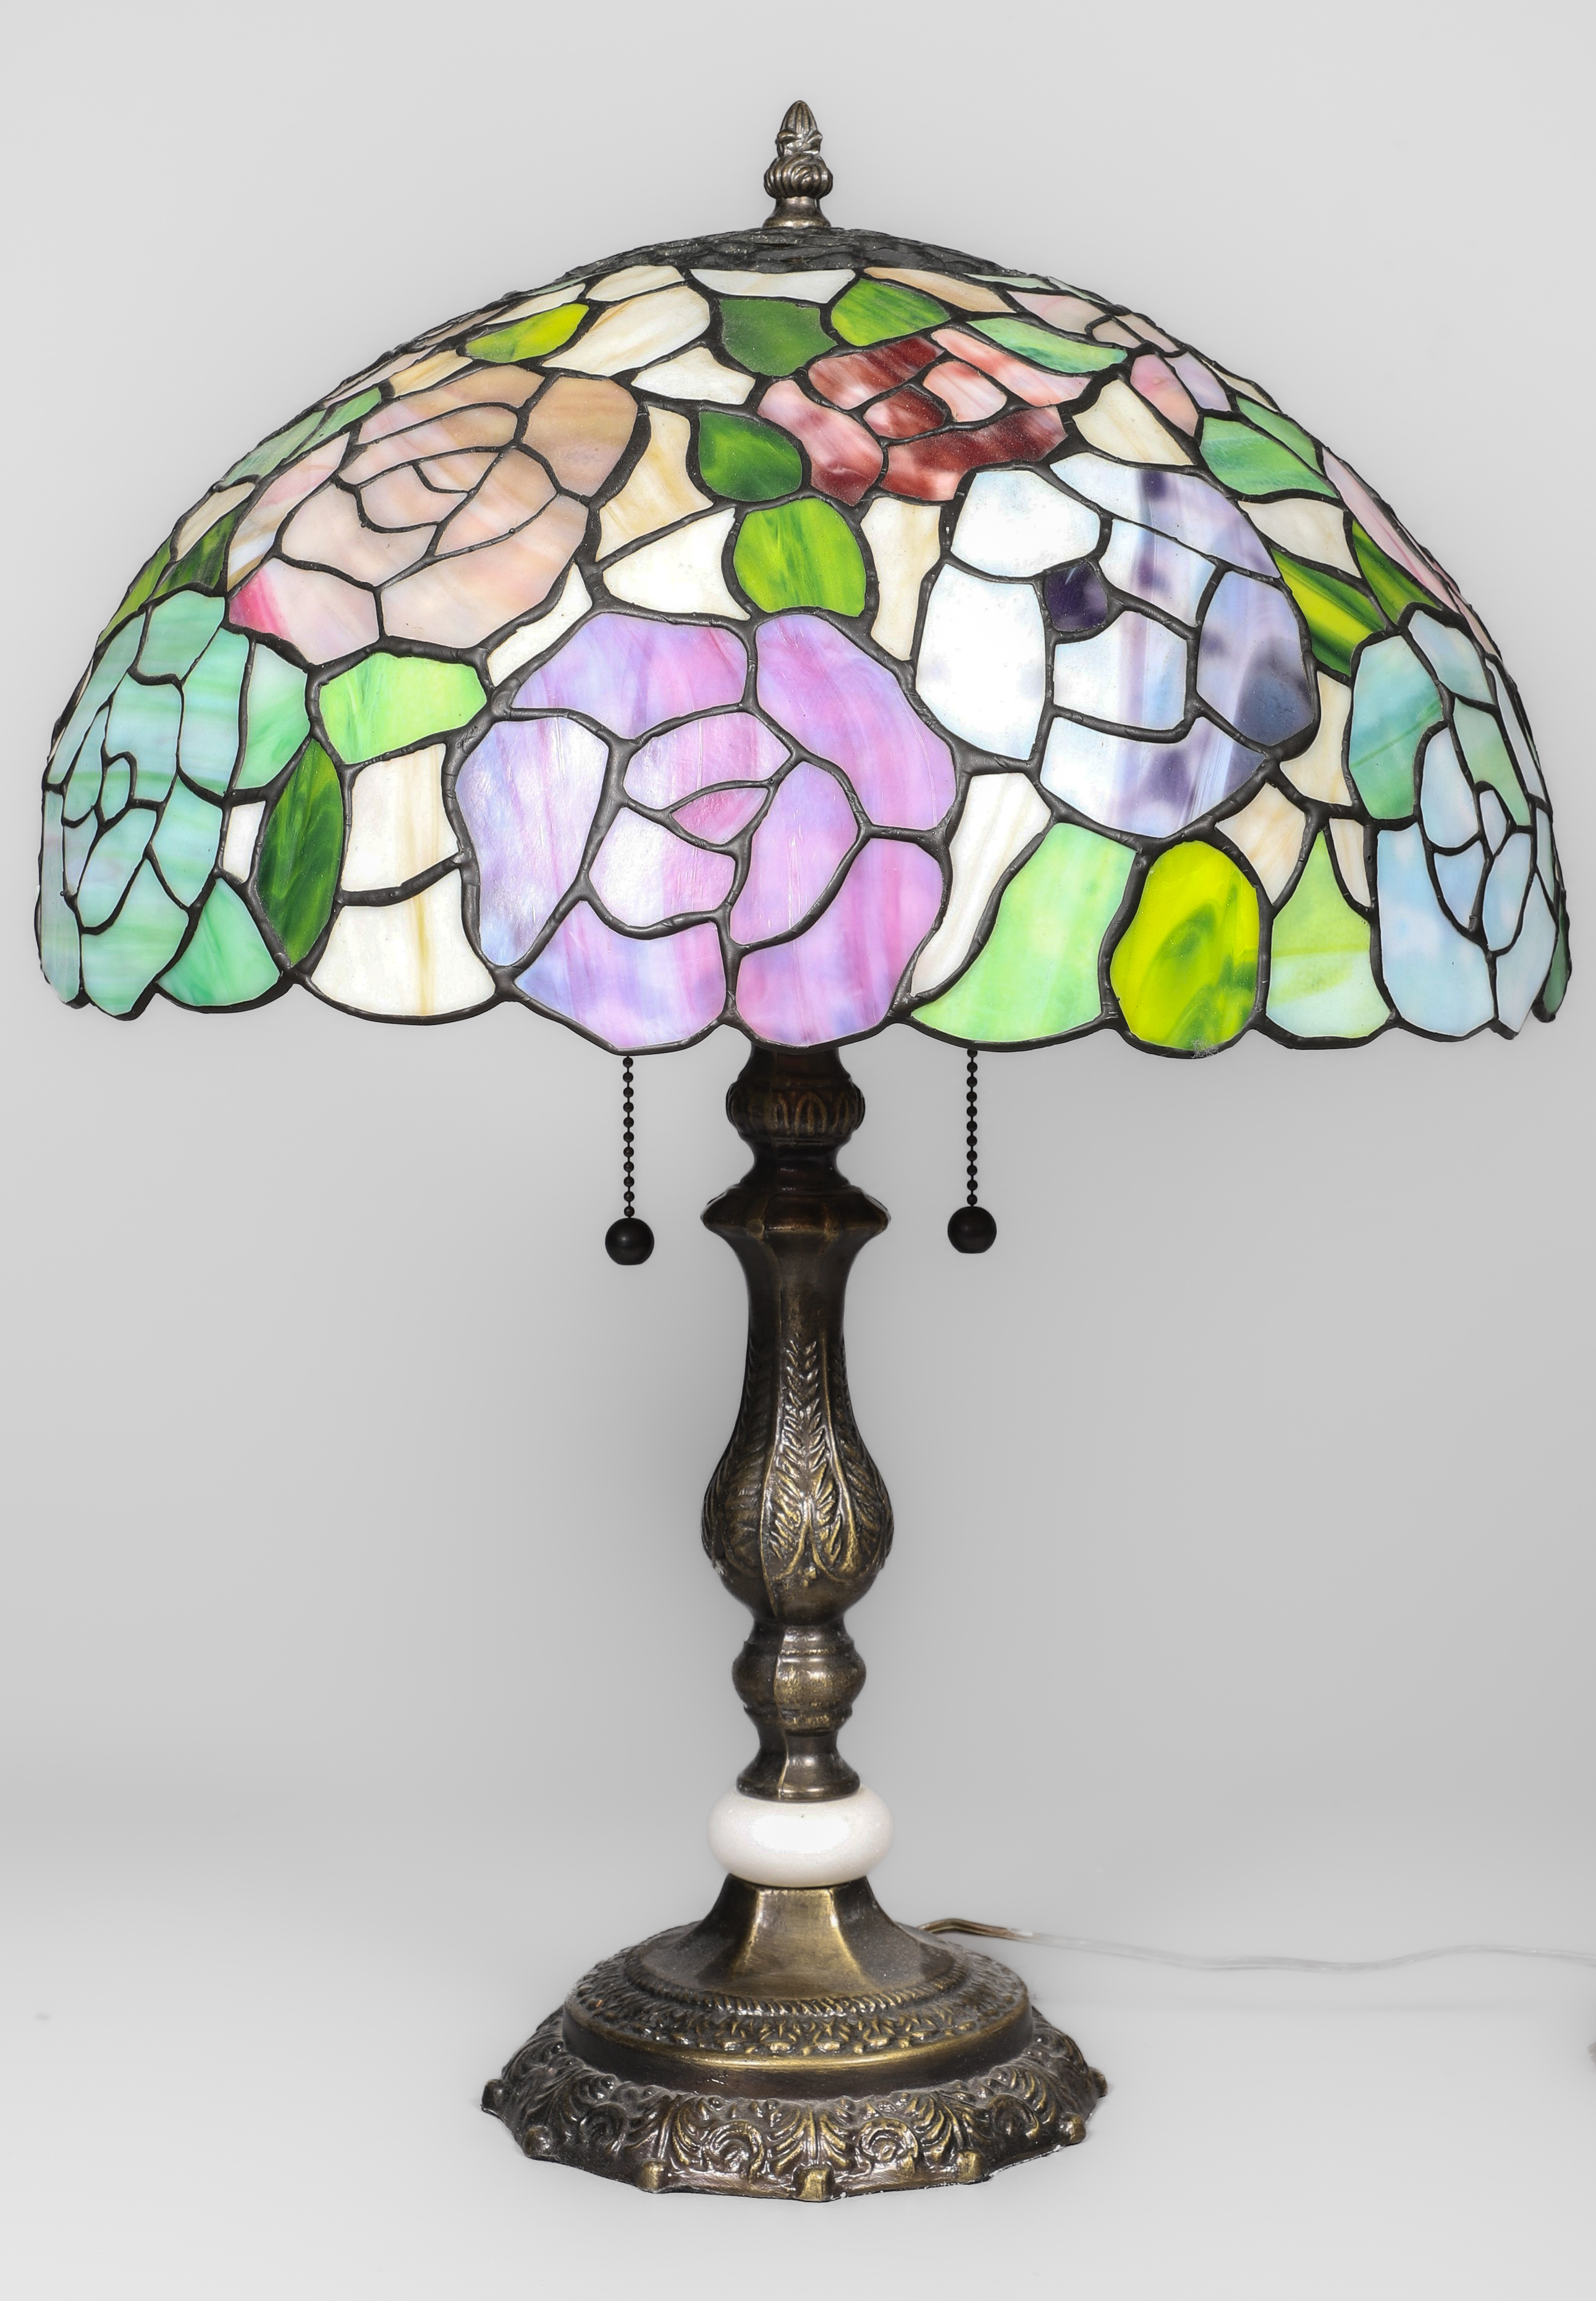 Leaded stained glass table lamp, bronzed